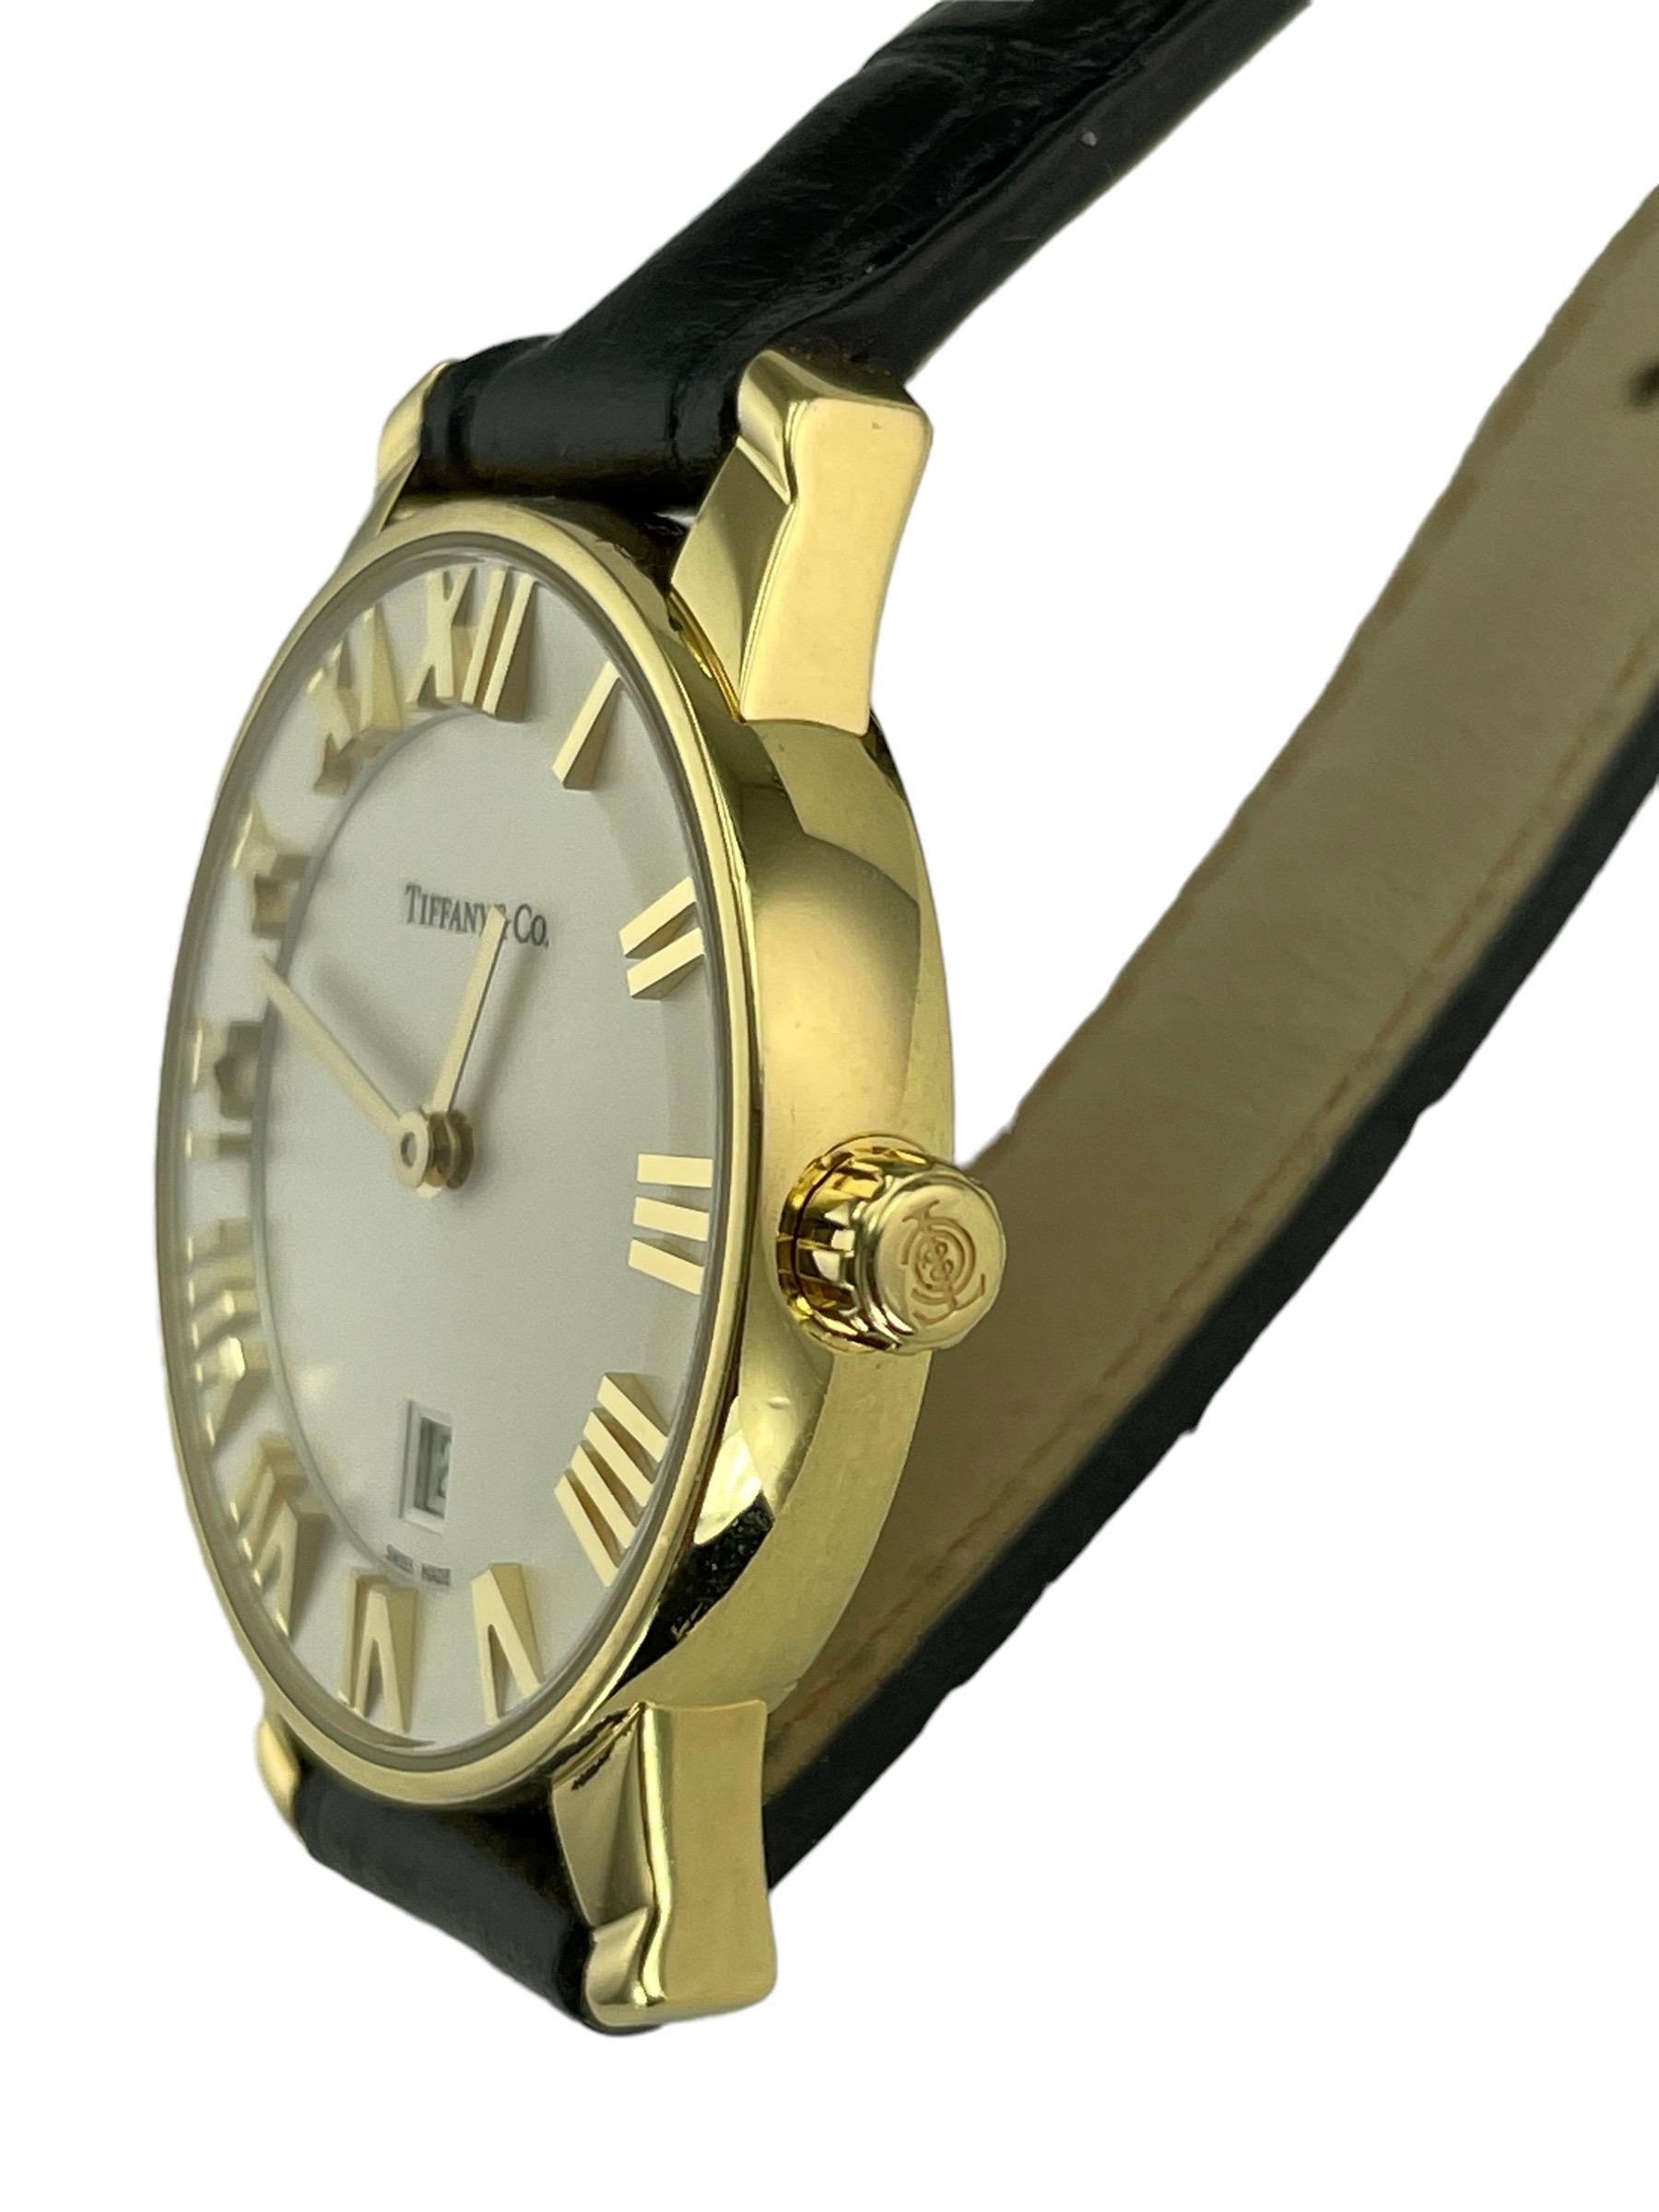 Tiffany Atlas yellow gold quartz wristwatch.

ABOUT THIS ITEM: Tiffany Atlas 18k yellow gold quartz wristwatch with leather strap, from the late 1990s.

SPECIFICATIONS: DJ92C

METAL: 18k yellow gold.

MEASUREMENTS: 29mm

CONDITION: high